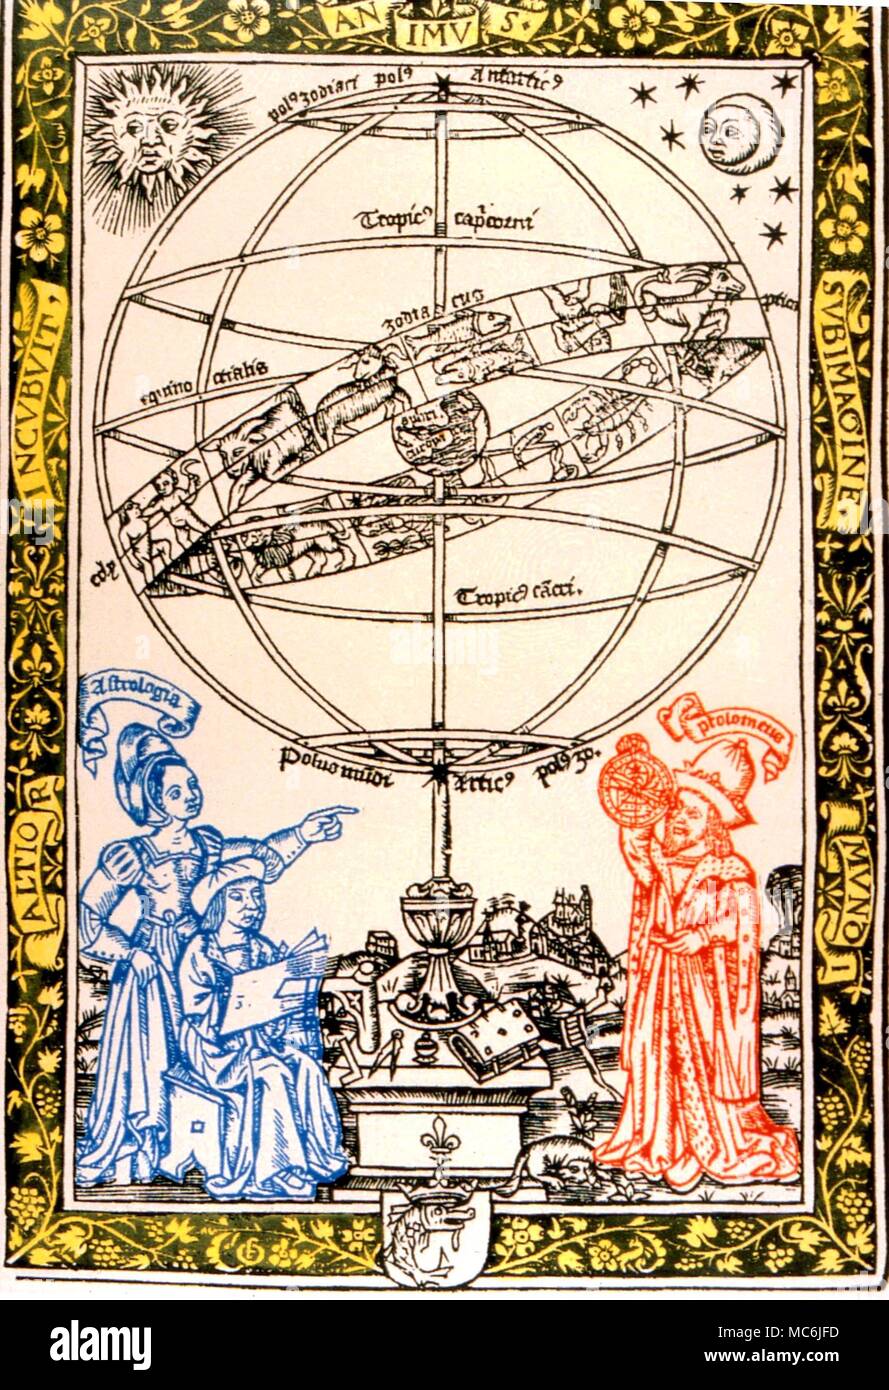 OCCULTISTS - Portrait of Ptolemy, with the personification of the starry world, Urania. After an early16th century woodcut Stock Photo